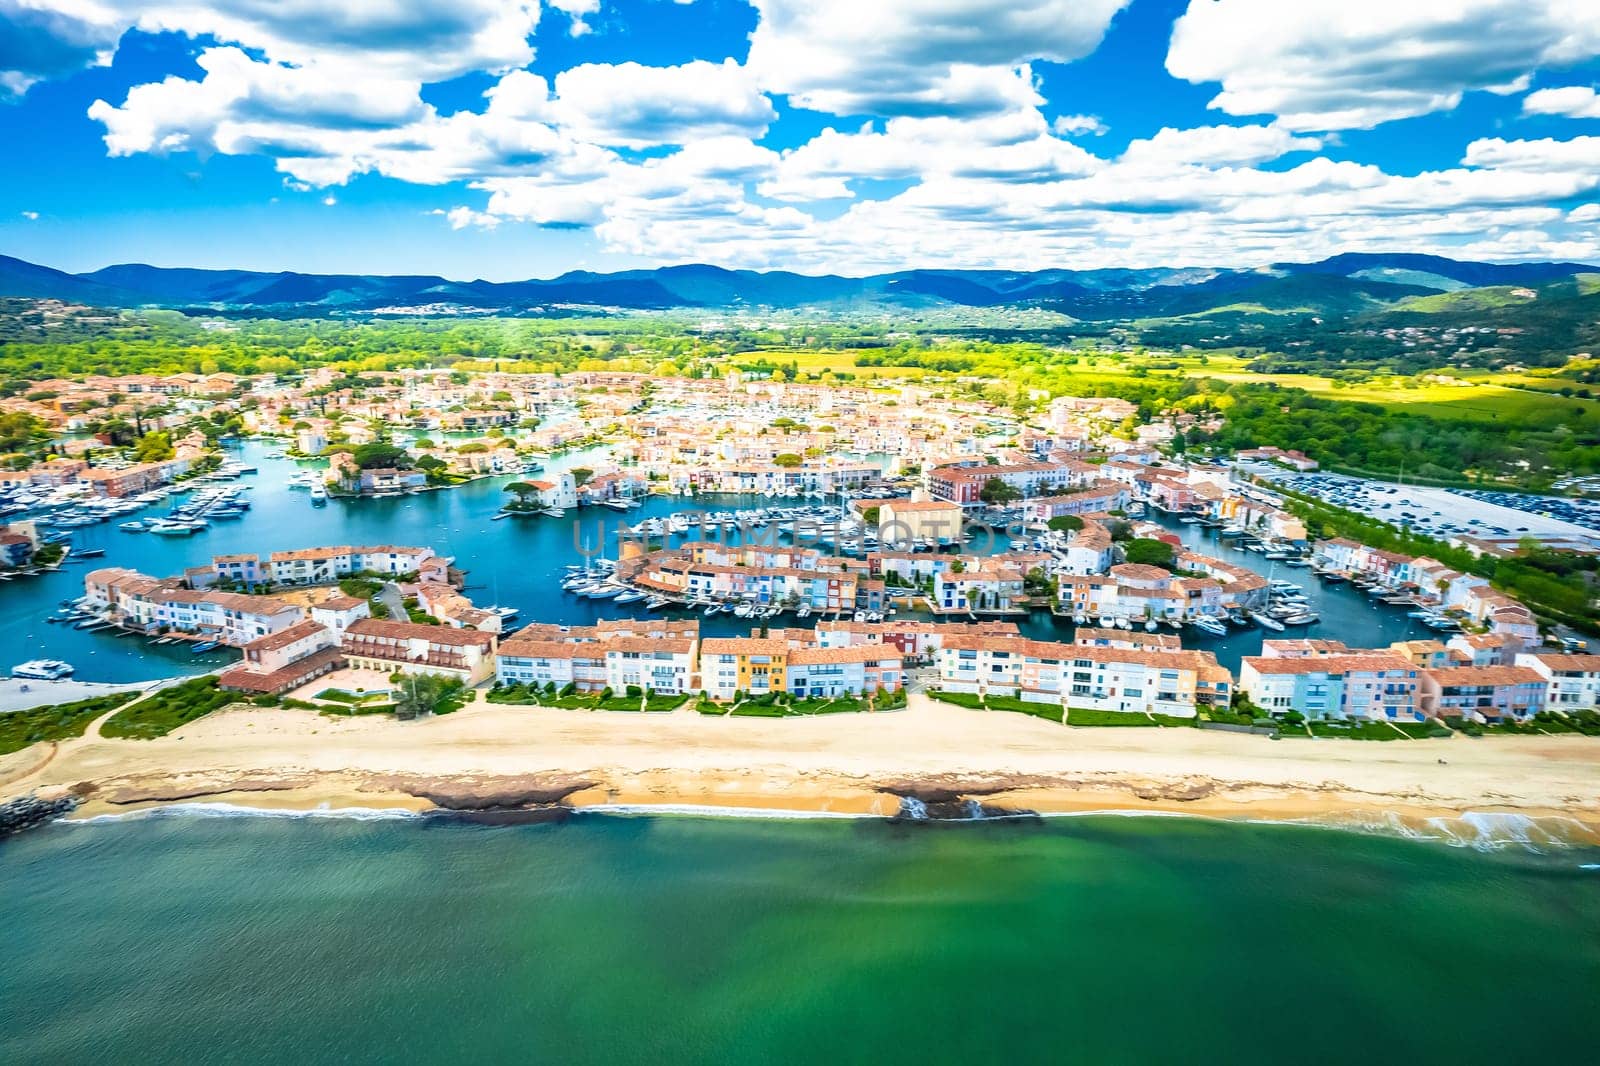 Scenic Port Grimaud yachting village marina aerial view by xbrchx